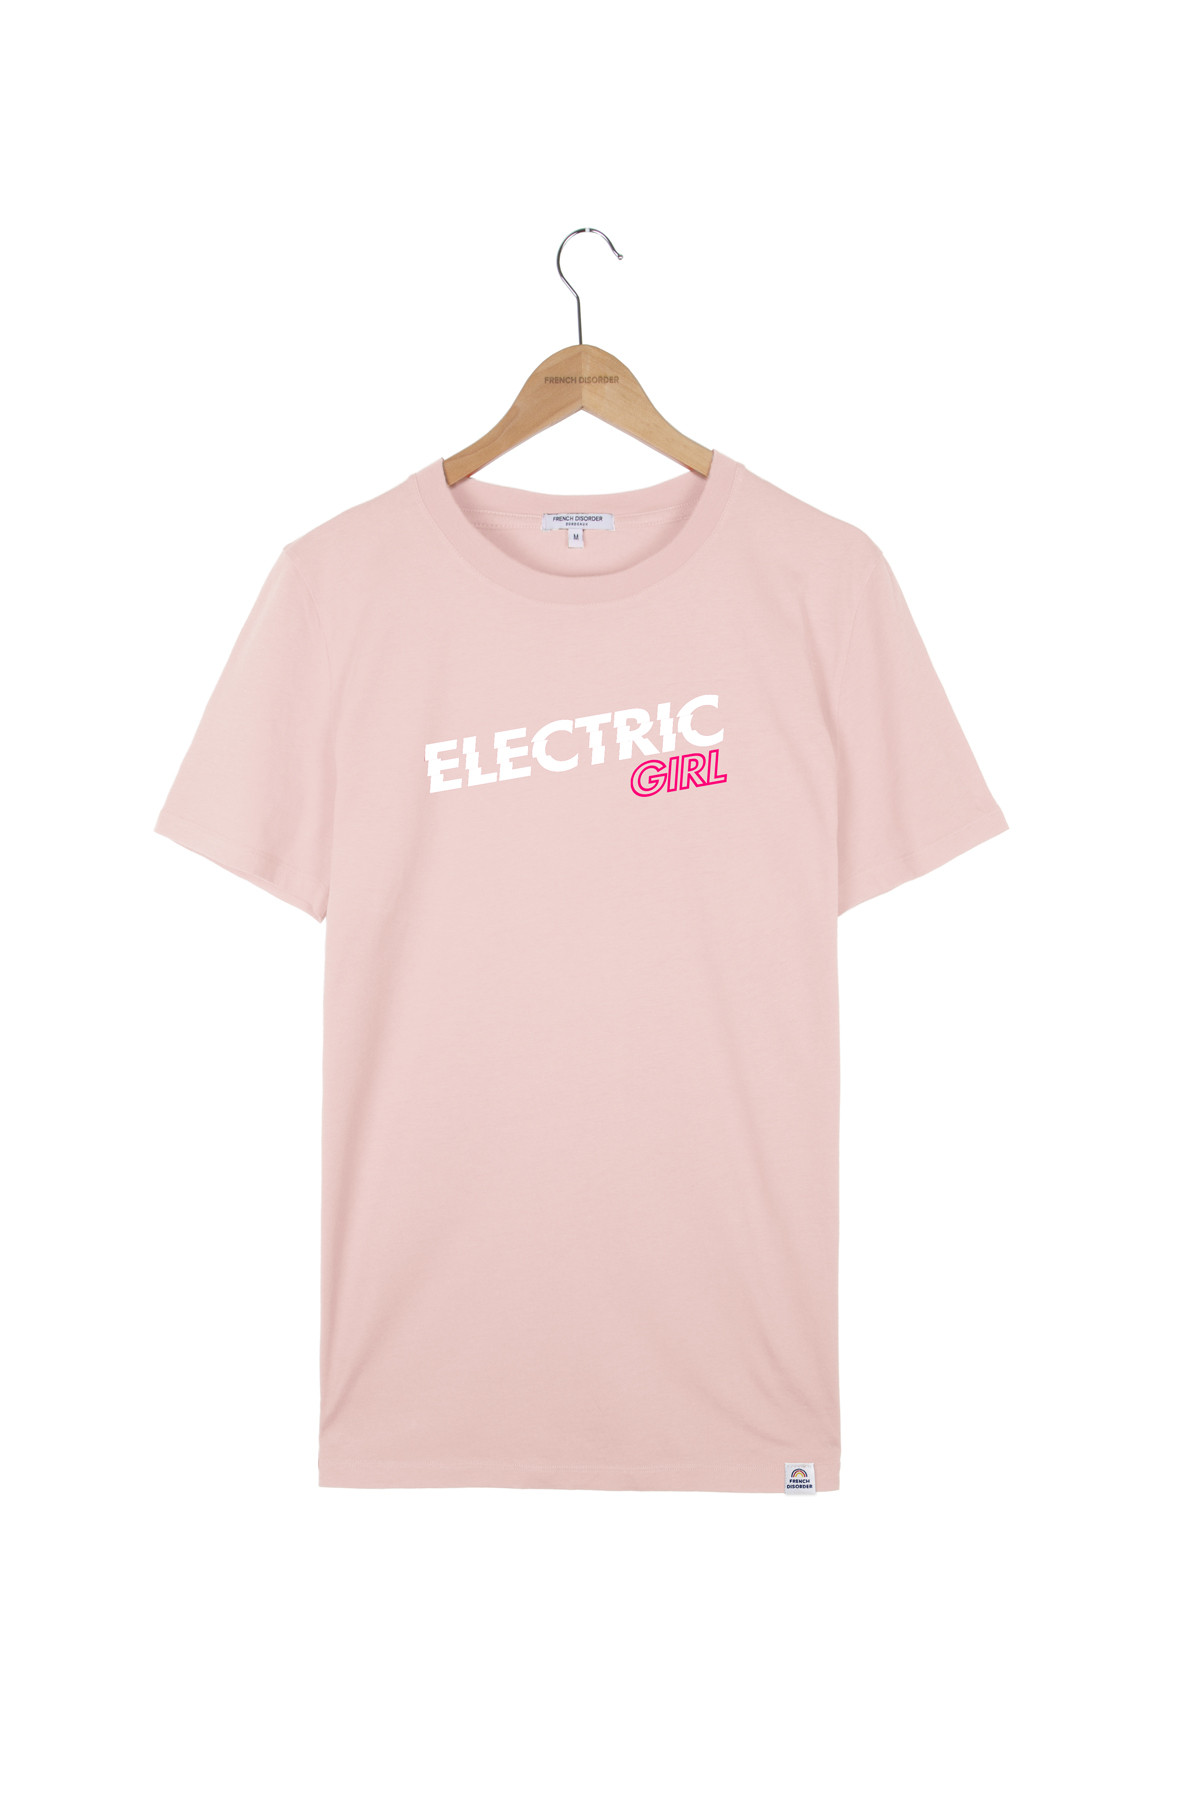 Tshirt ELECTRIC GIRL French Disorder